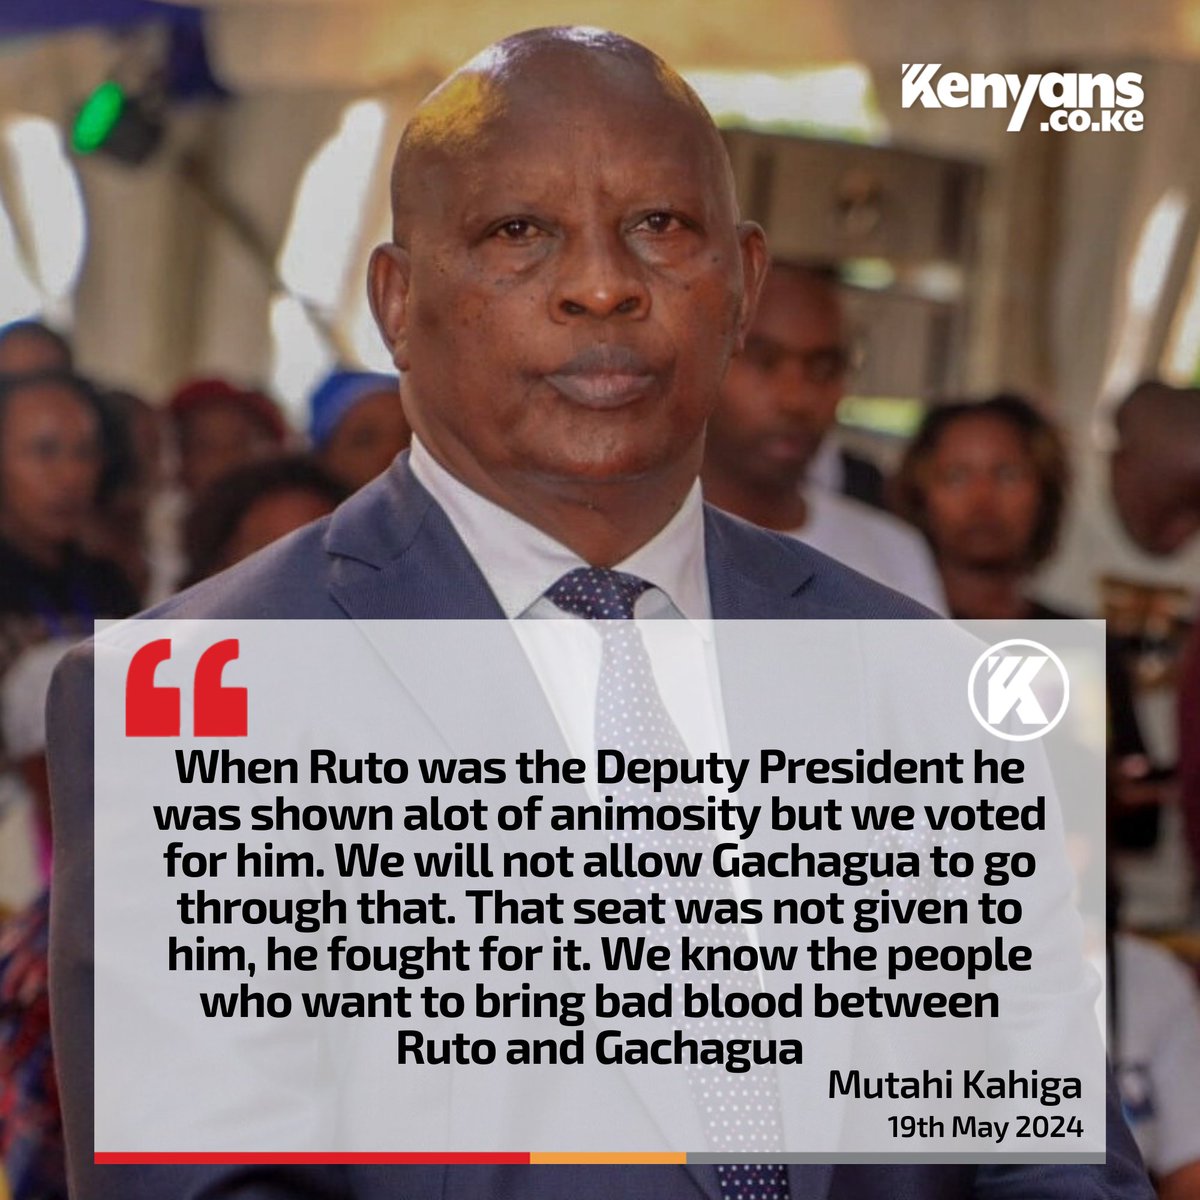 When Ruto was the Deputy President he was shown alot of animosity but we voted for him. We will not allow Gachagua to go through that - Nyeri Governor Mutahi Kahiga